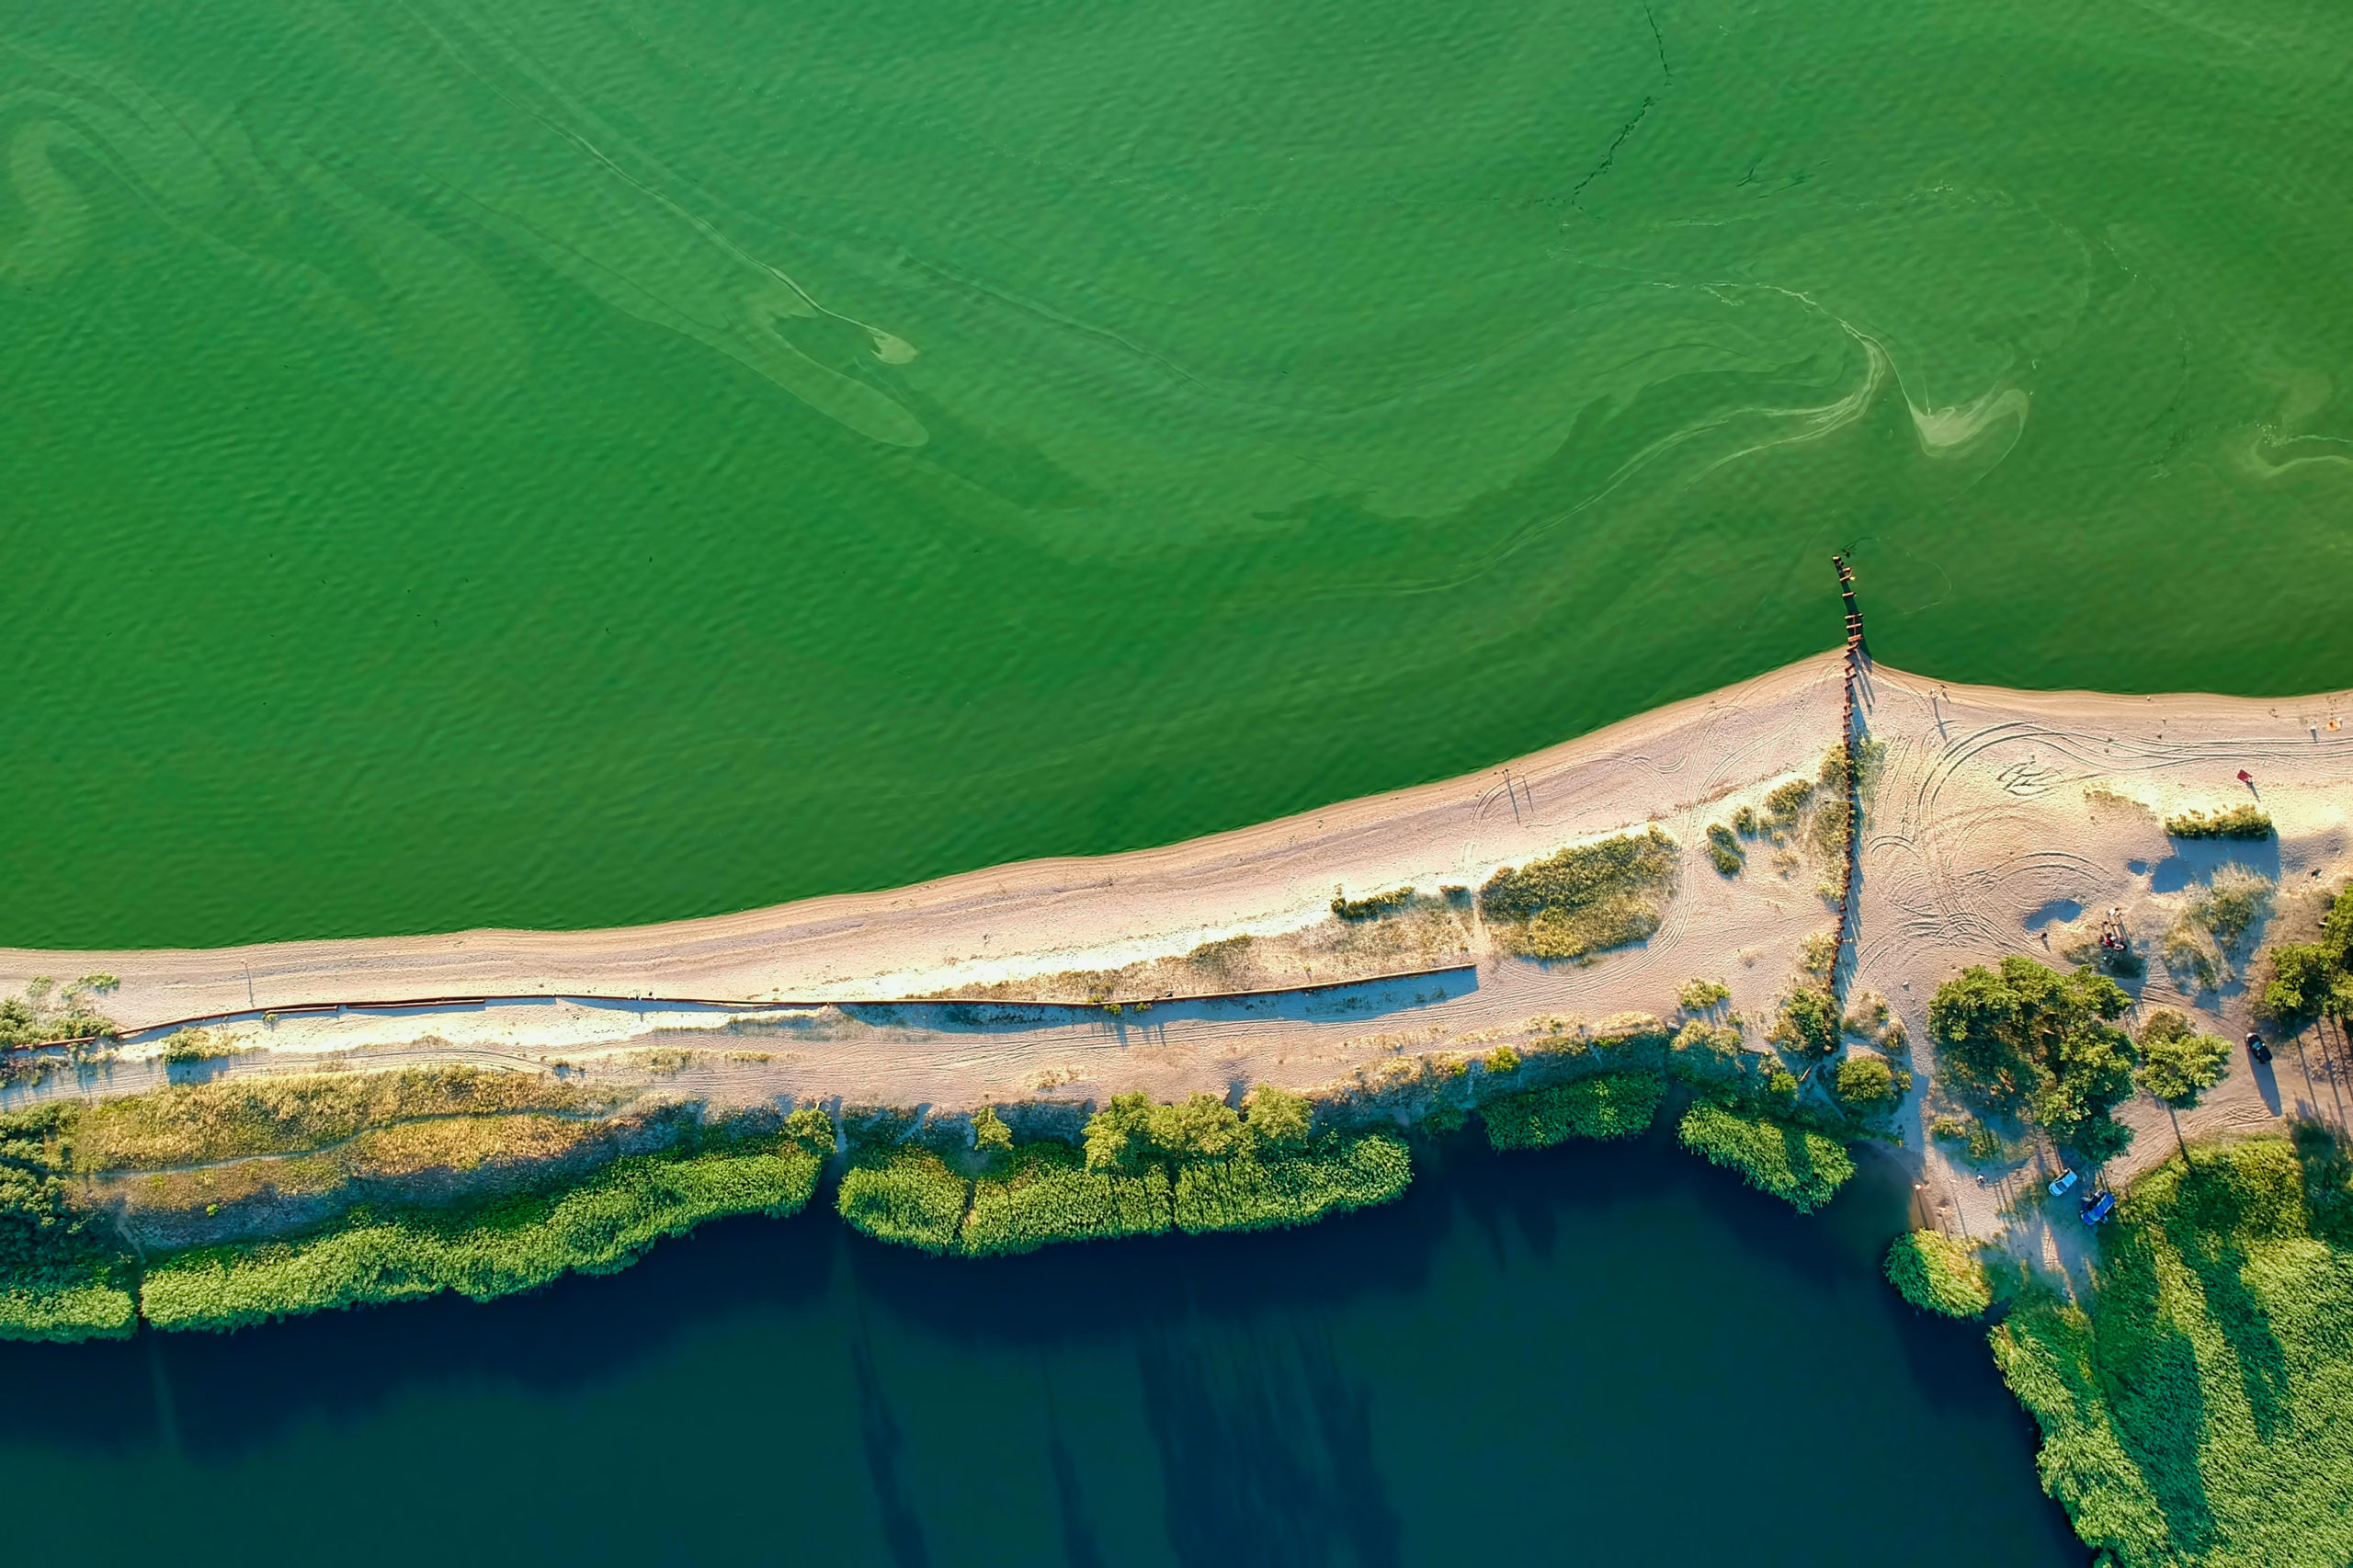 Algae bloom season. Polluted green water of a shallow gulf in summer, aerial view